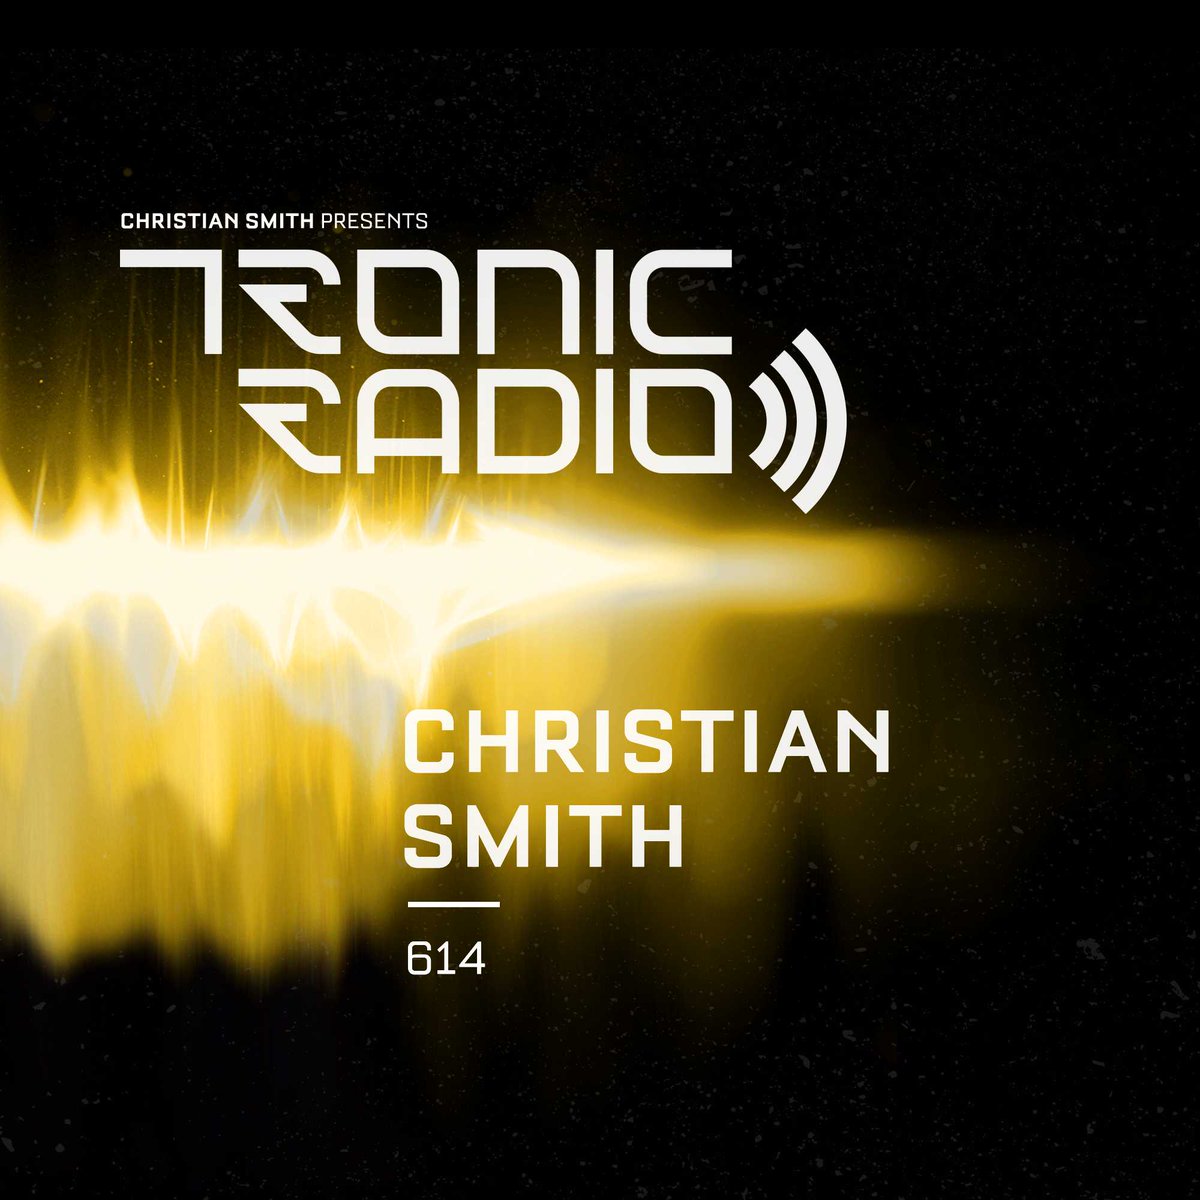 It's time for #techno on #Radio jenny.fm with @CSmithLIVE and Tronic #Radioshow at 21:00 CET #tunein bit.ly/3ZVGest